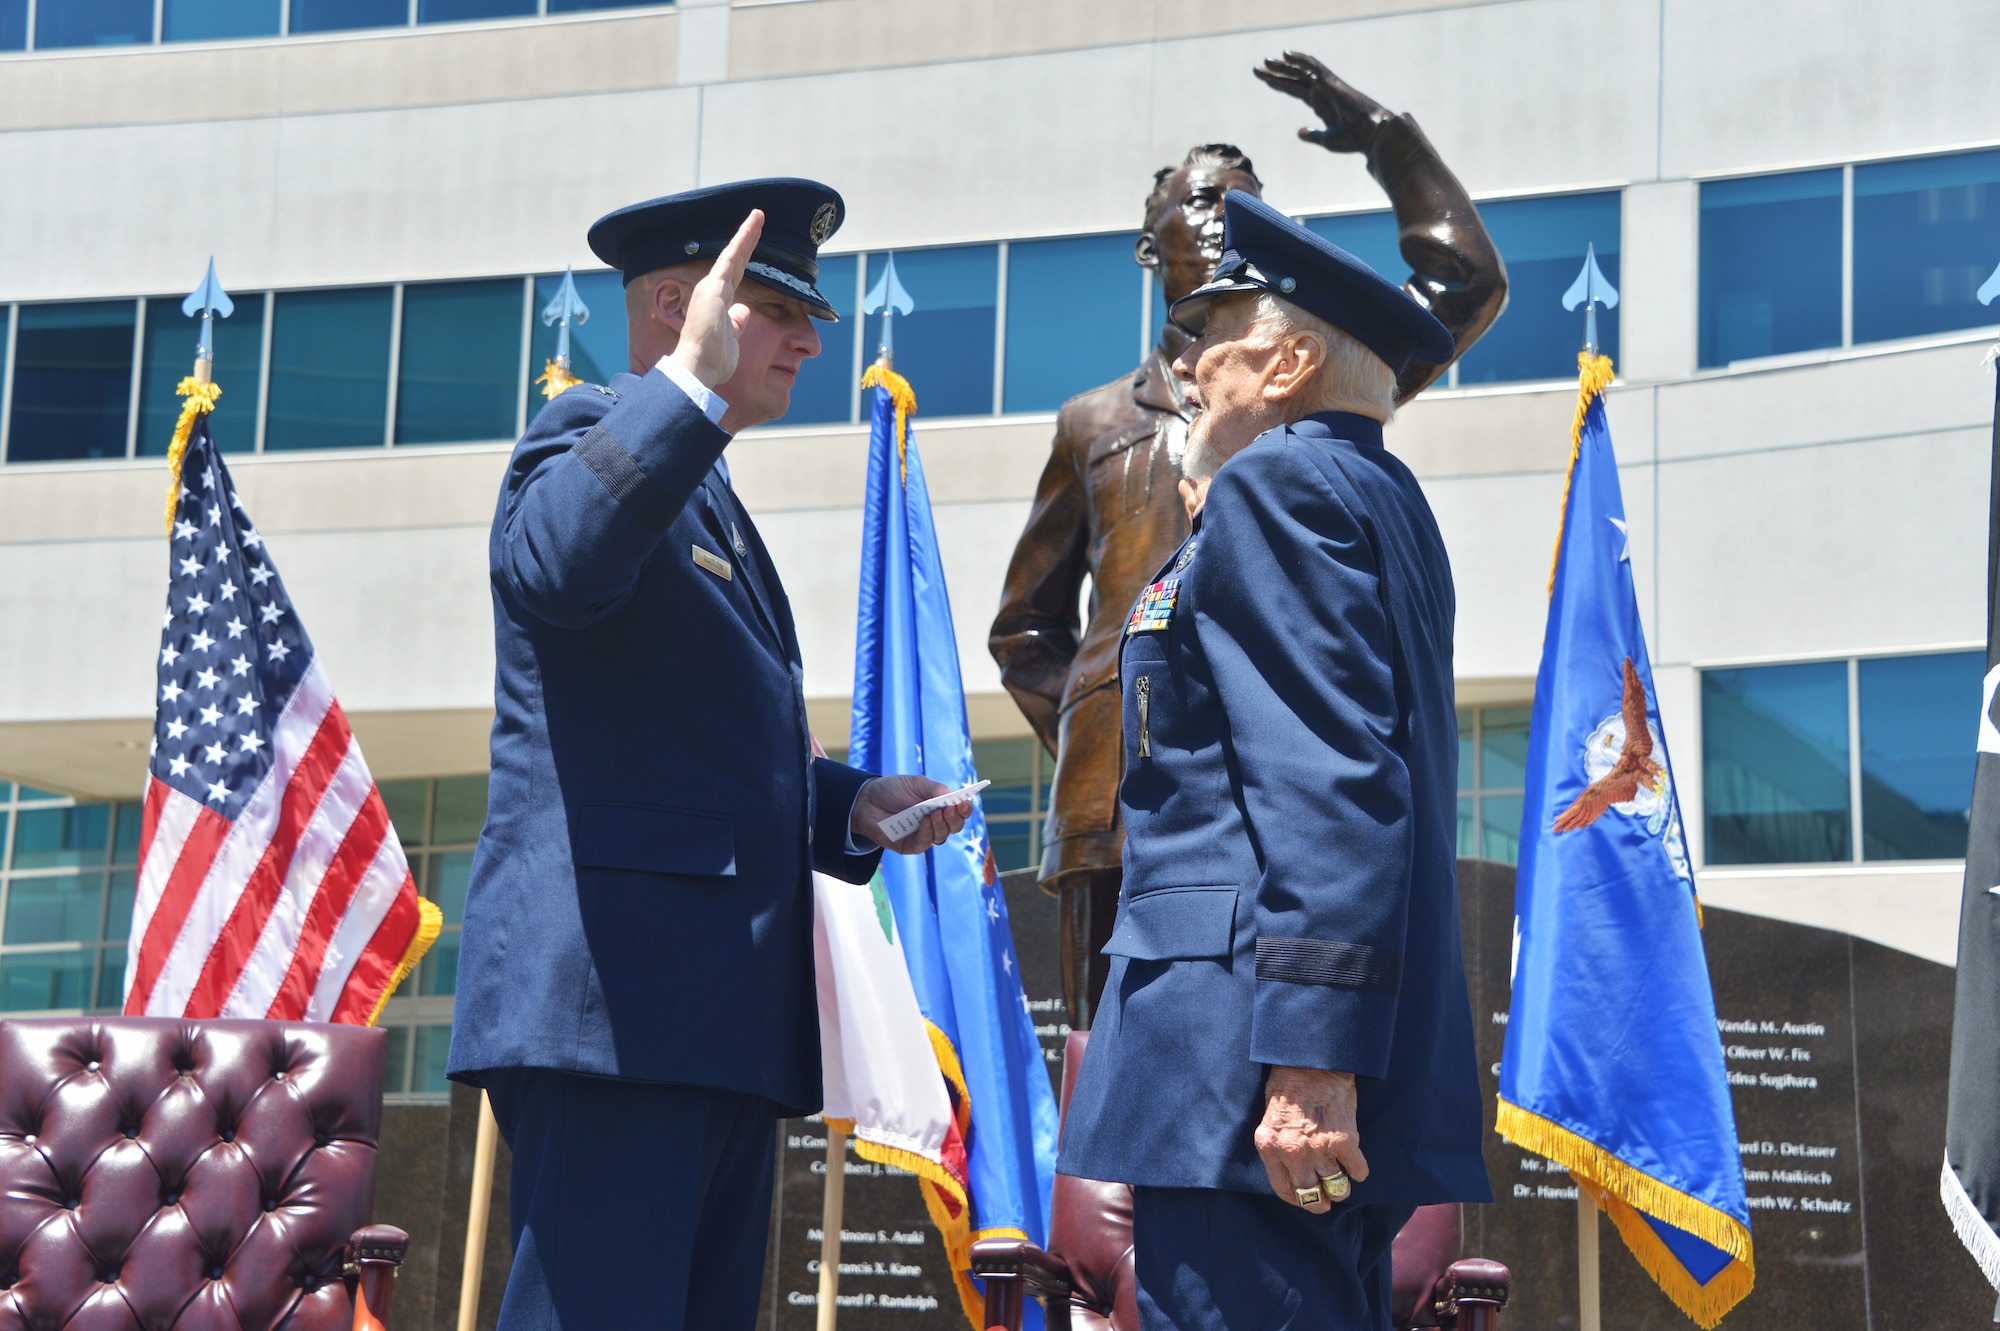 Space Force Lt. Gen. Michael Guetlein, Space Systems Commander (left) reaffirms oath to retired Air Force Brig. Gen. Buzz Aldrin (right) during his promotion ceremony at Space Systems Command on May 5, 2023. Aldrin flew the F-86 Sabre in 66 combat missions, where he shot down two MIG-15s, while assigned to Suwon Air Base South Korea’s 16th Fighter-Interceptor Squadron and served as a flight commander within the 22nd Fighter Squadron at Bitburg Air Base Germany. (U.S. Space Force photo by Van Ha)